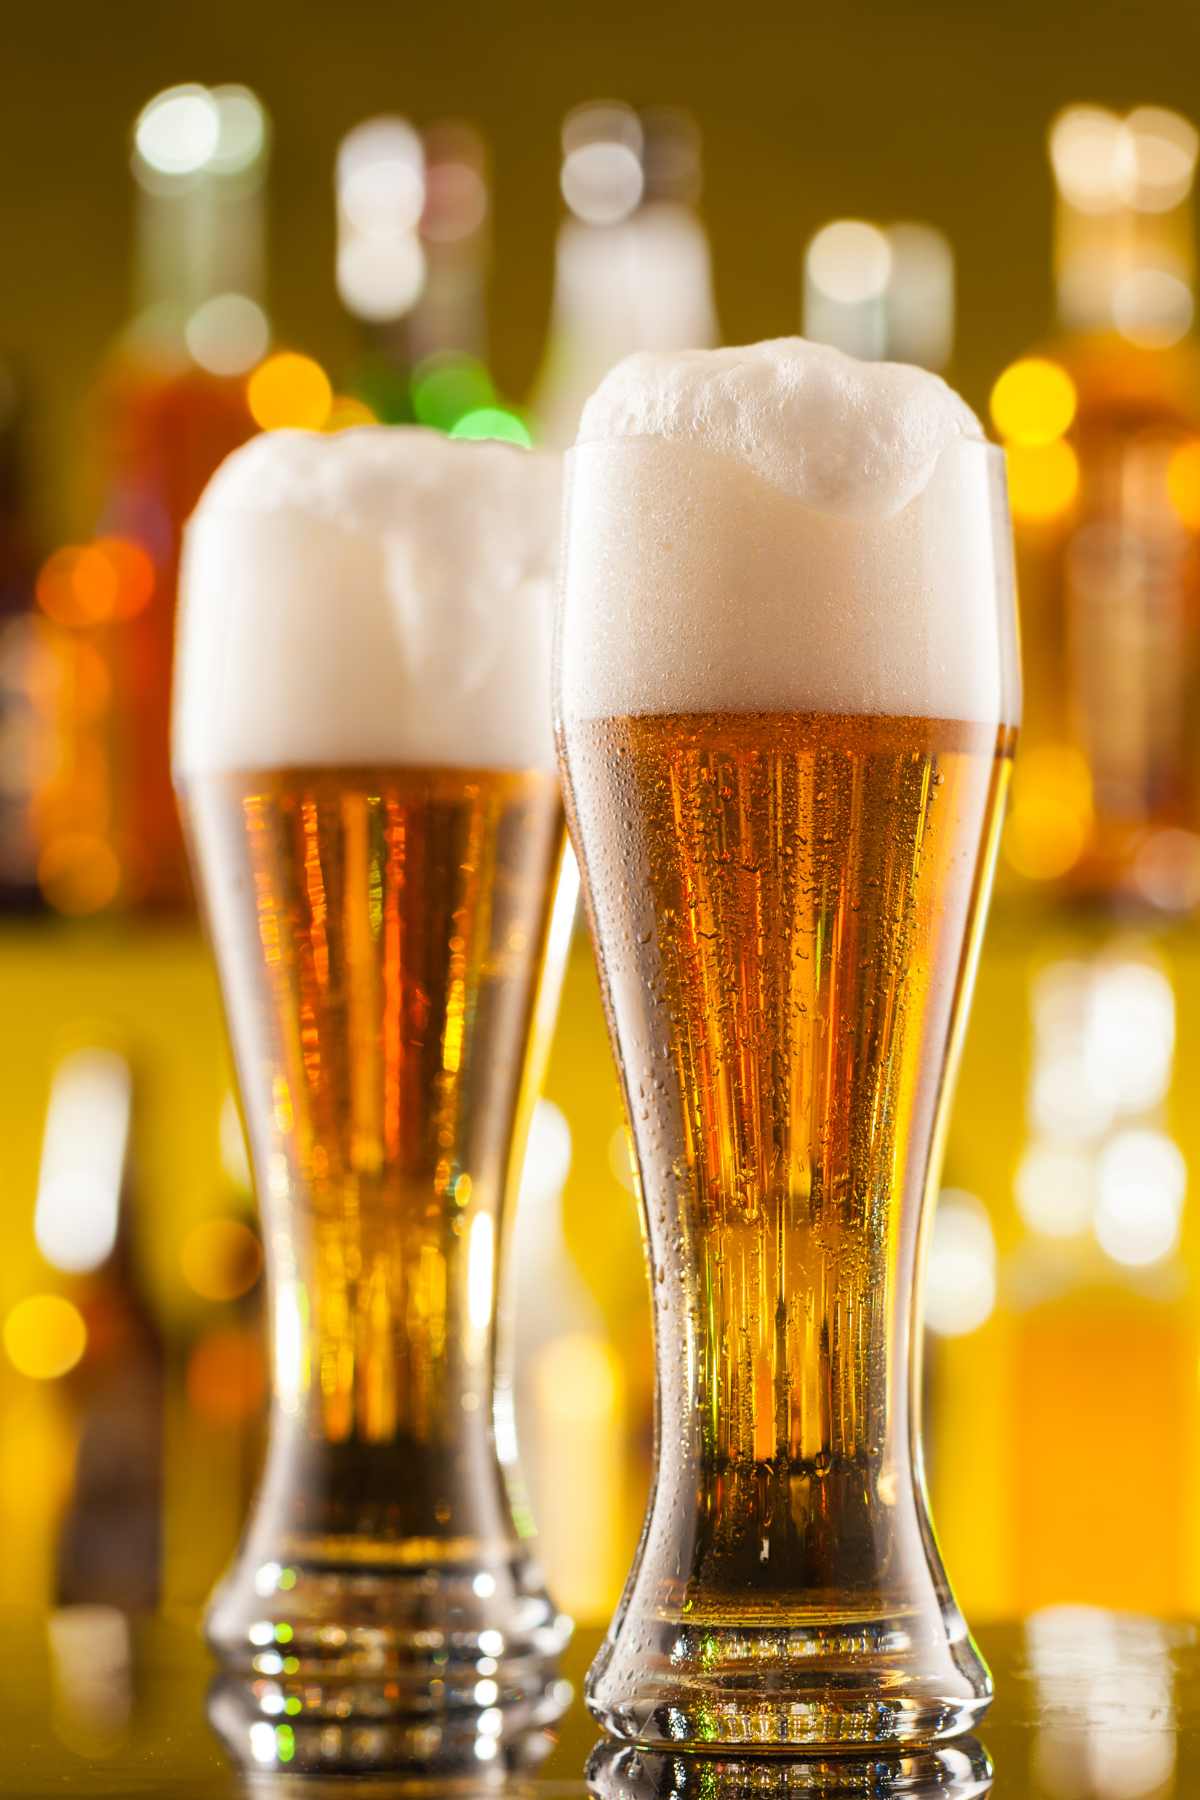 Low-Calorie Beer offers a refreshing option for those seeking a lighter alternative while still enjoying the flavors and social aspects of beer drinking. In this post, we've rounded up some of the best low-calorie beer brands and factors to consider when choosing them.